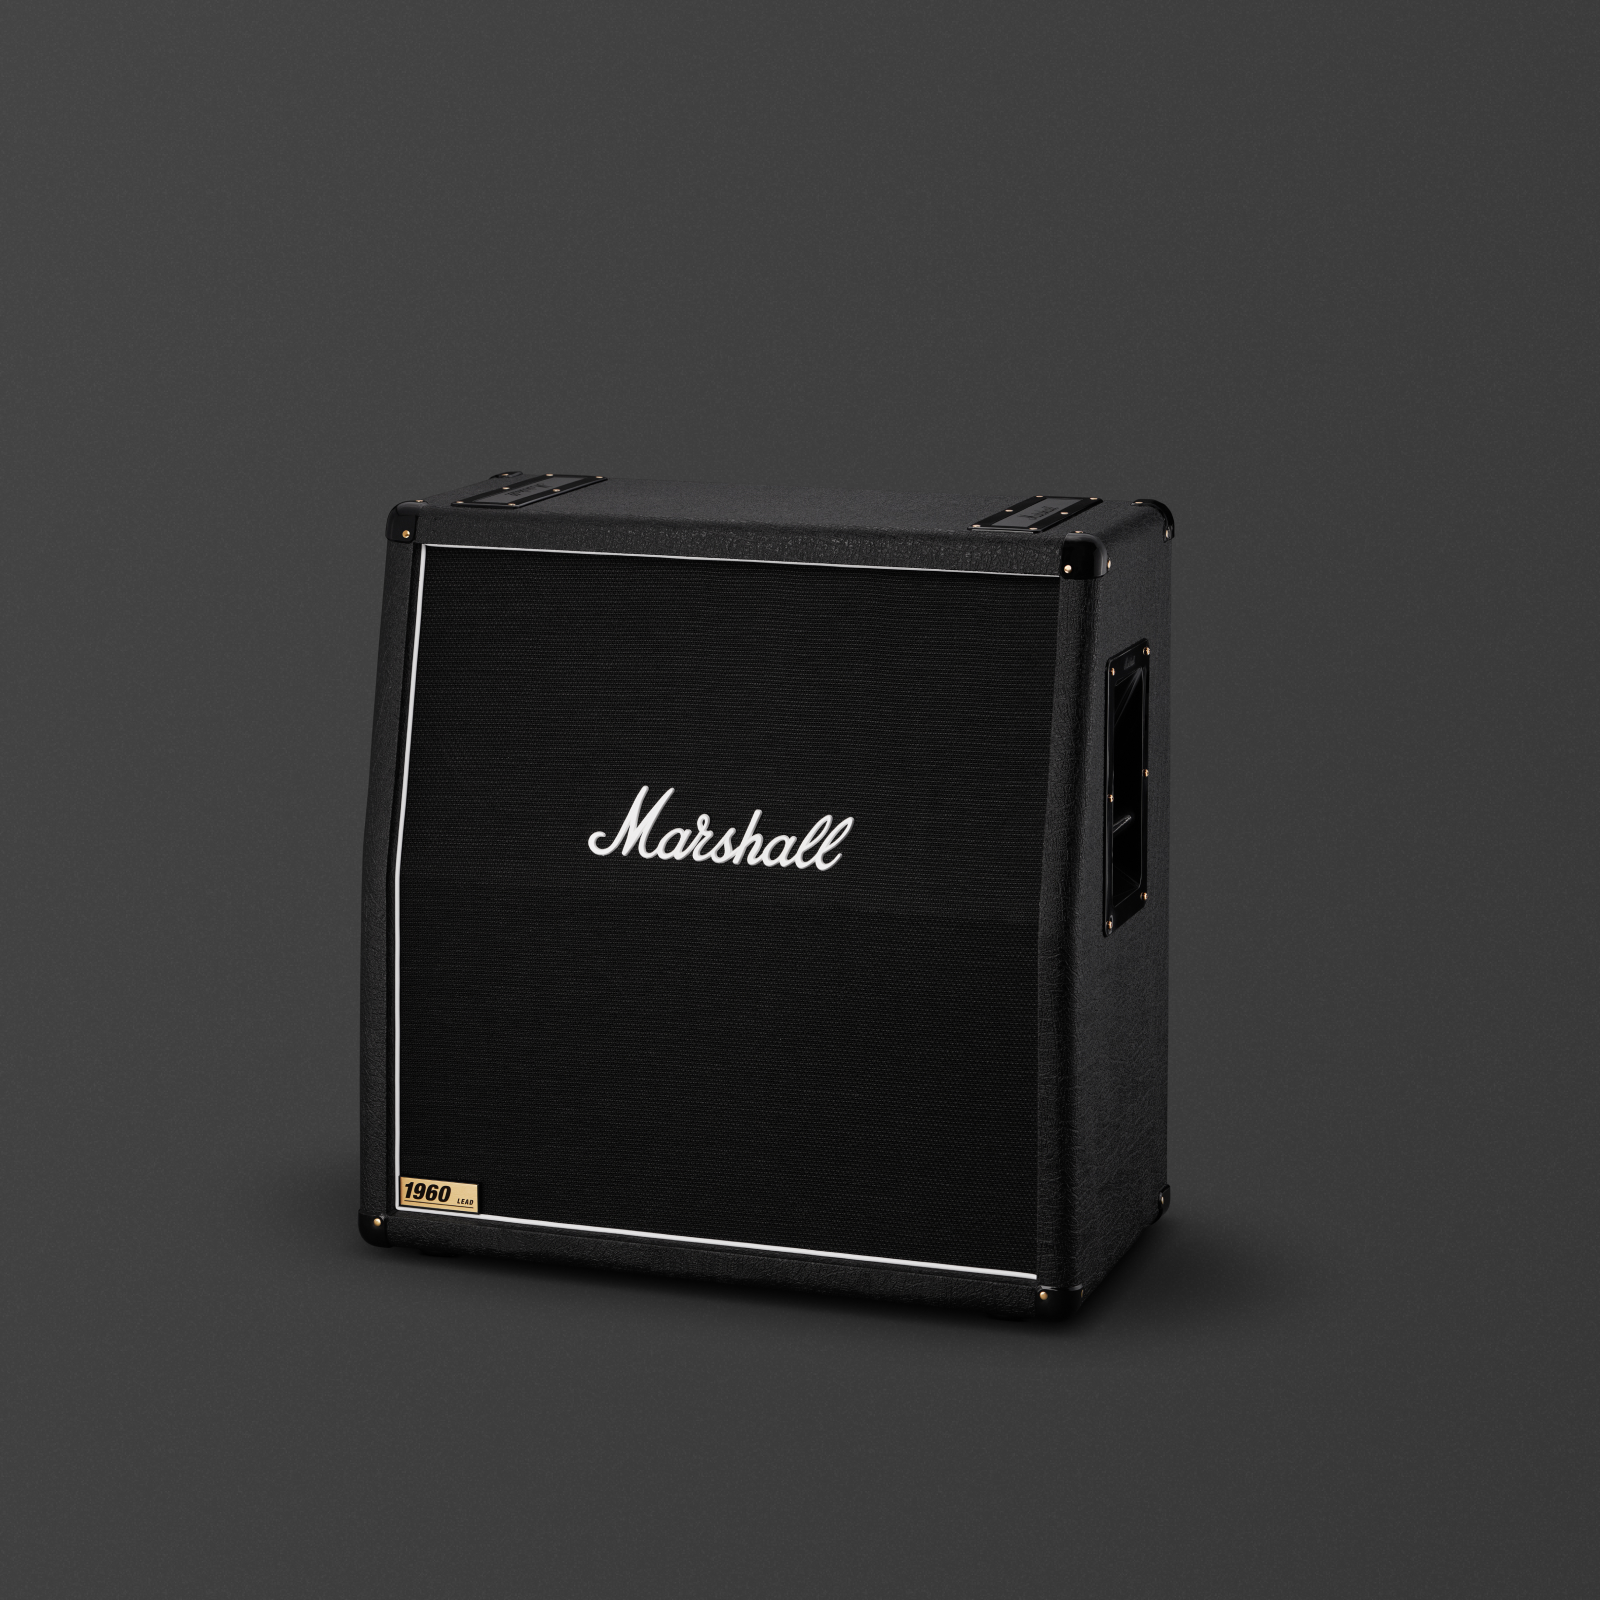 Marshall's 1960A black cabinet.  